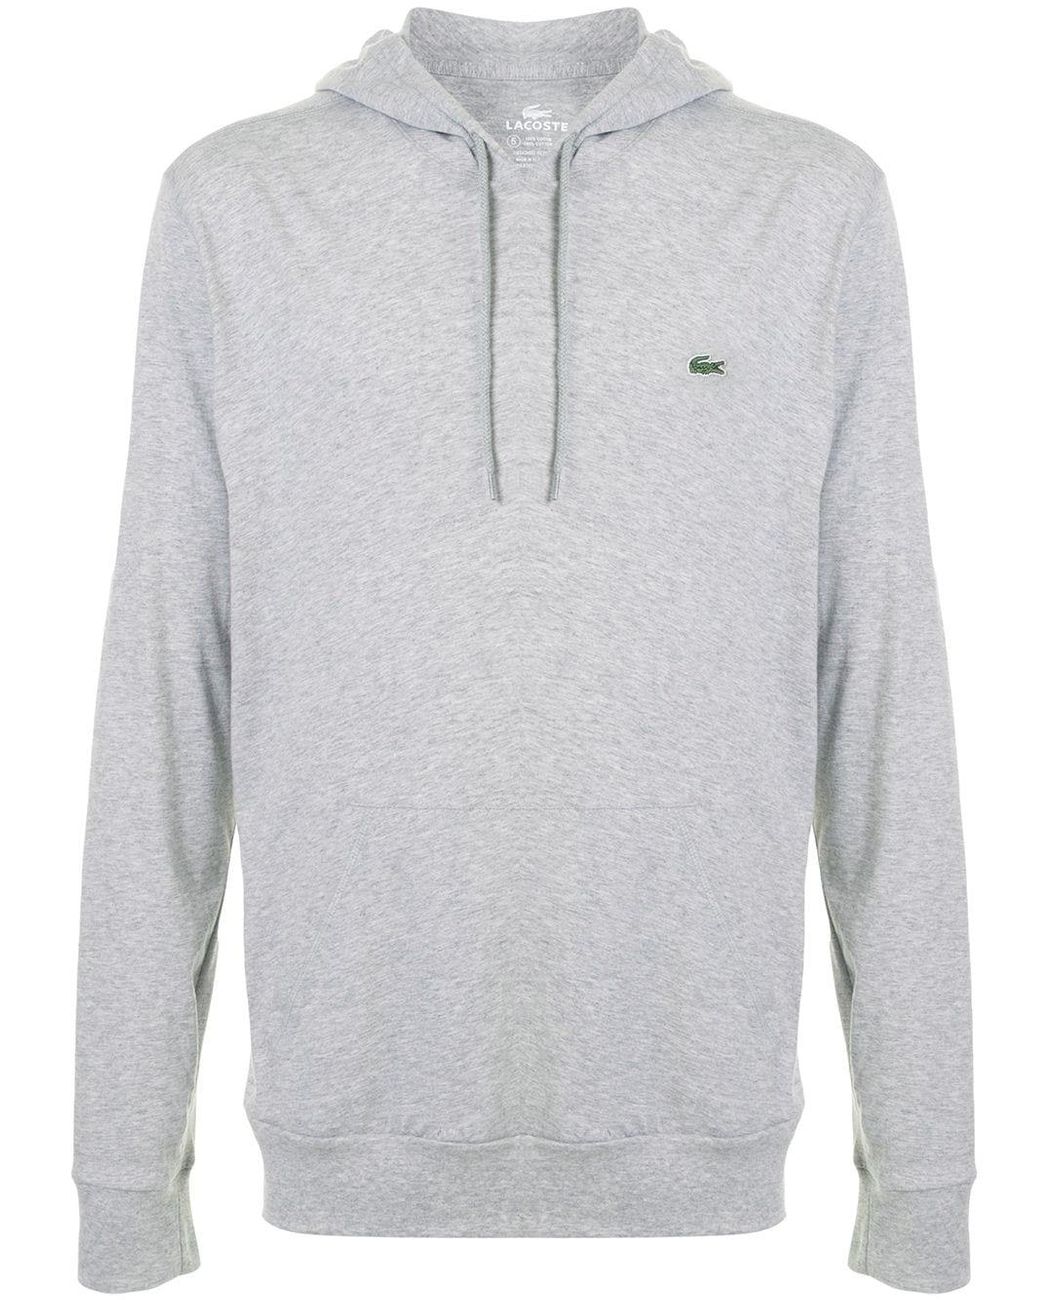 Lacoste Embroidered Logo Hoodie in Grey (Gray) for Men - Lyst